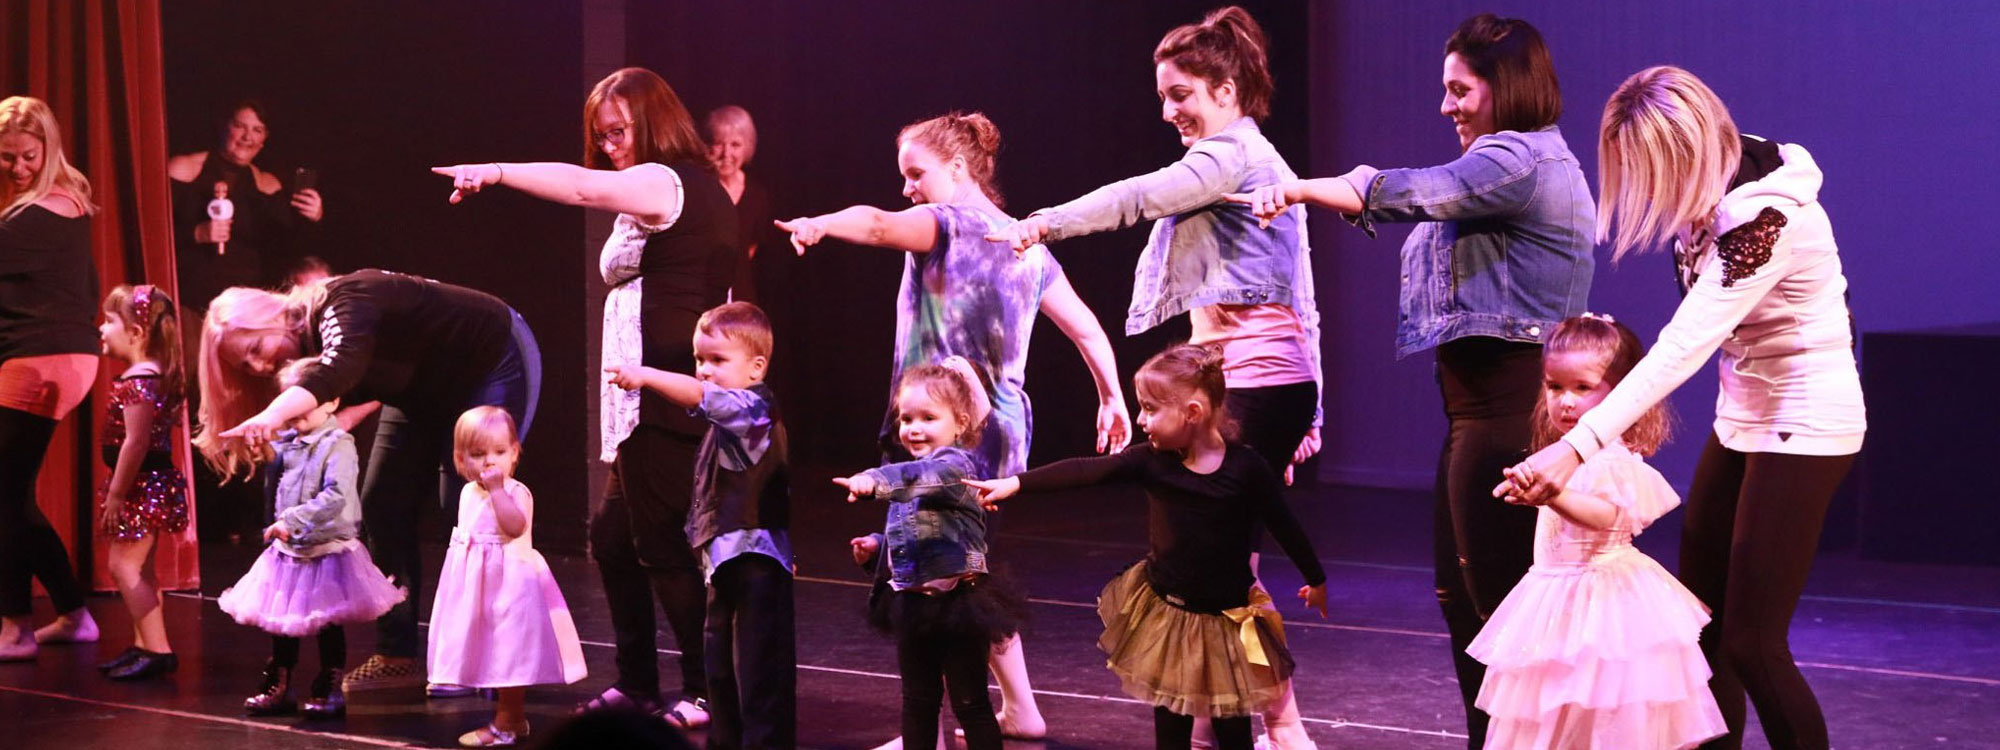 Wendy Leard School of Dance - Baby and Toddler Classes